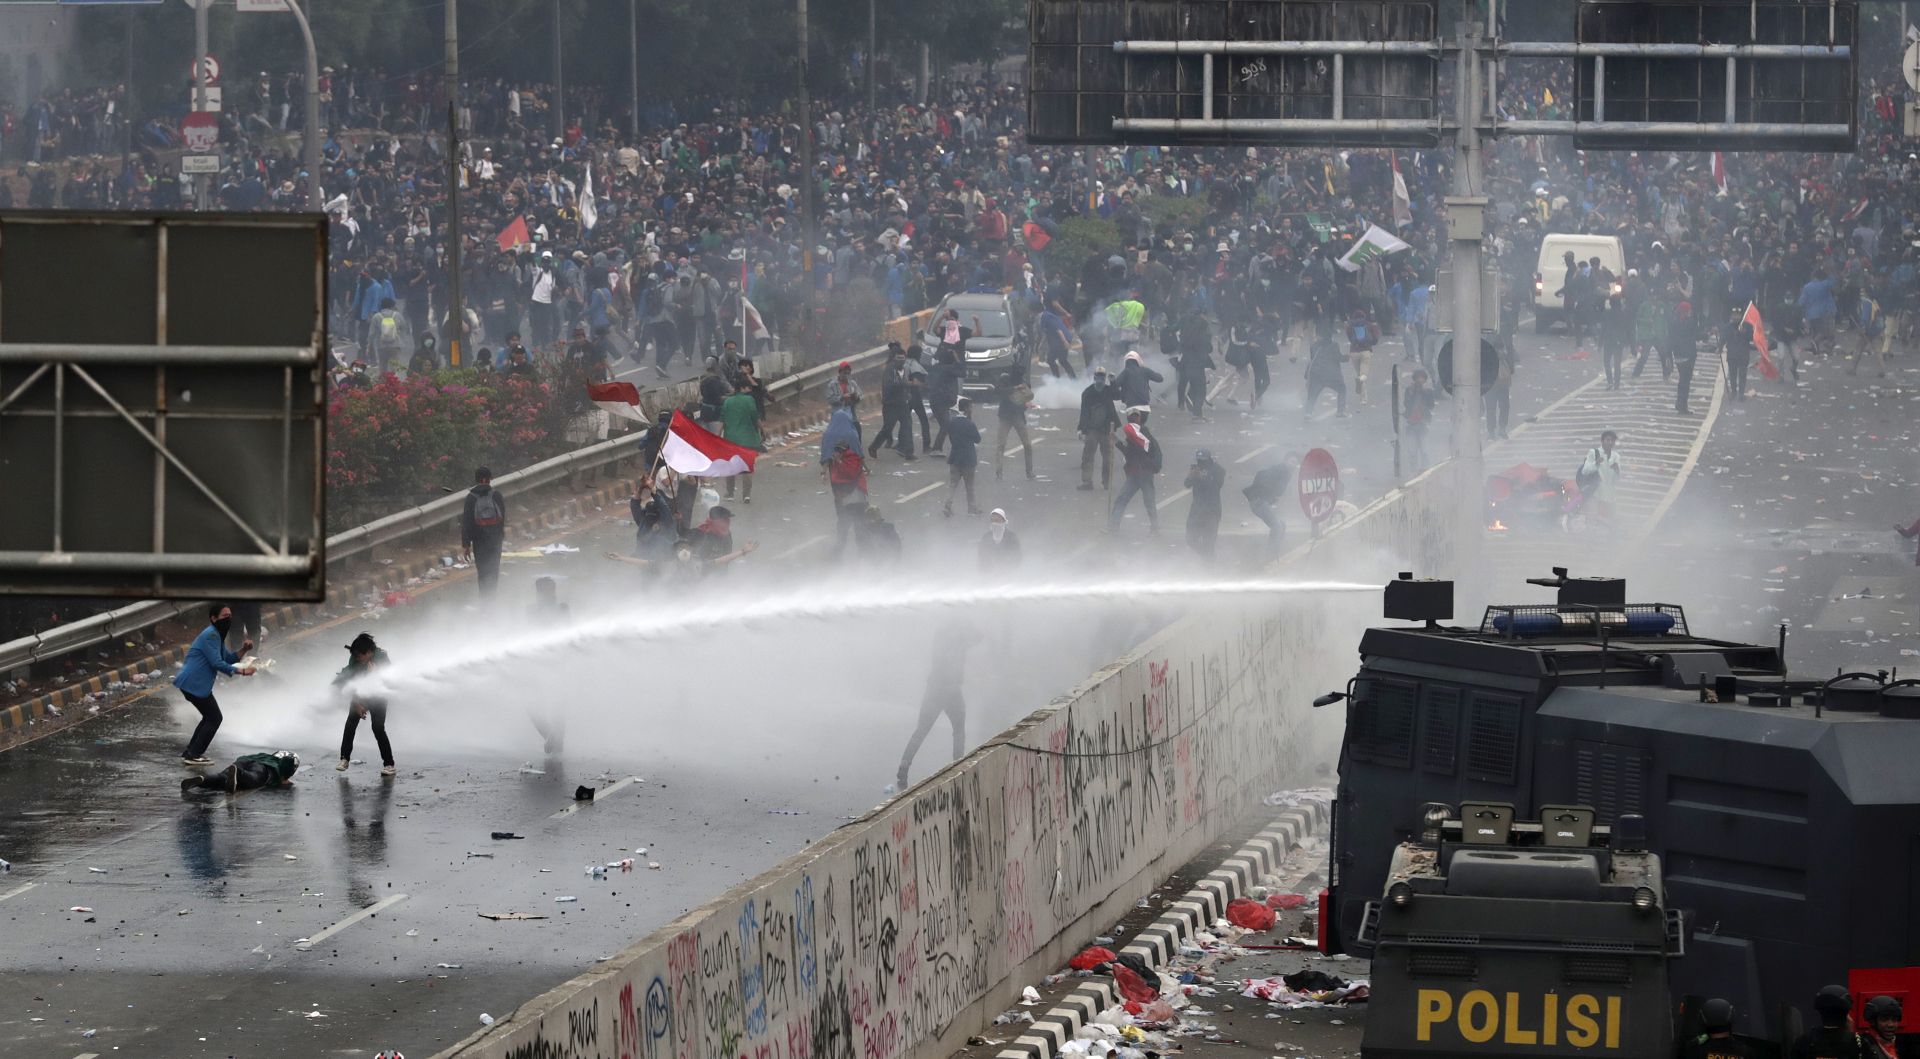 epa07865954 Indonesian riot police officers use a water cannon during clashes with students following a protest outside the parliament building in Jakarta, Indonesia, 24 September 2019. Thousands of students staged protests across the country against new law that proposed change in its criminal code laws and weaken the country's anti-corruption commission.  EPA/MAST IRHAM